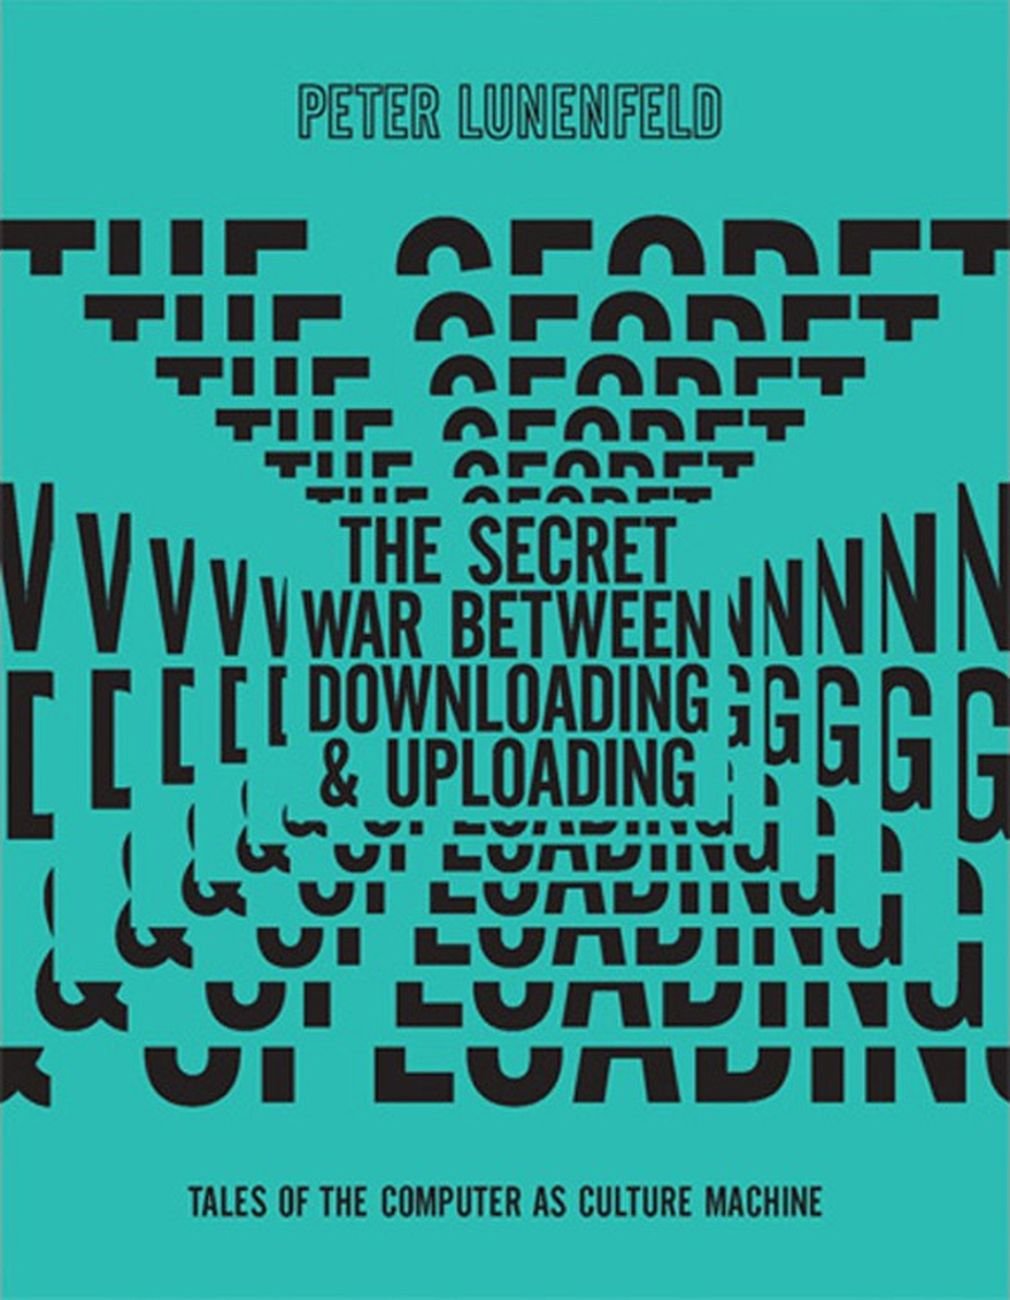 Peter Lunenfeld, The Secret War Between Download and Uploading. Tales of the Computer as Culture Machine (The MIT Press, 2011)